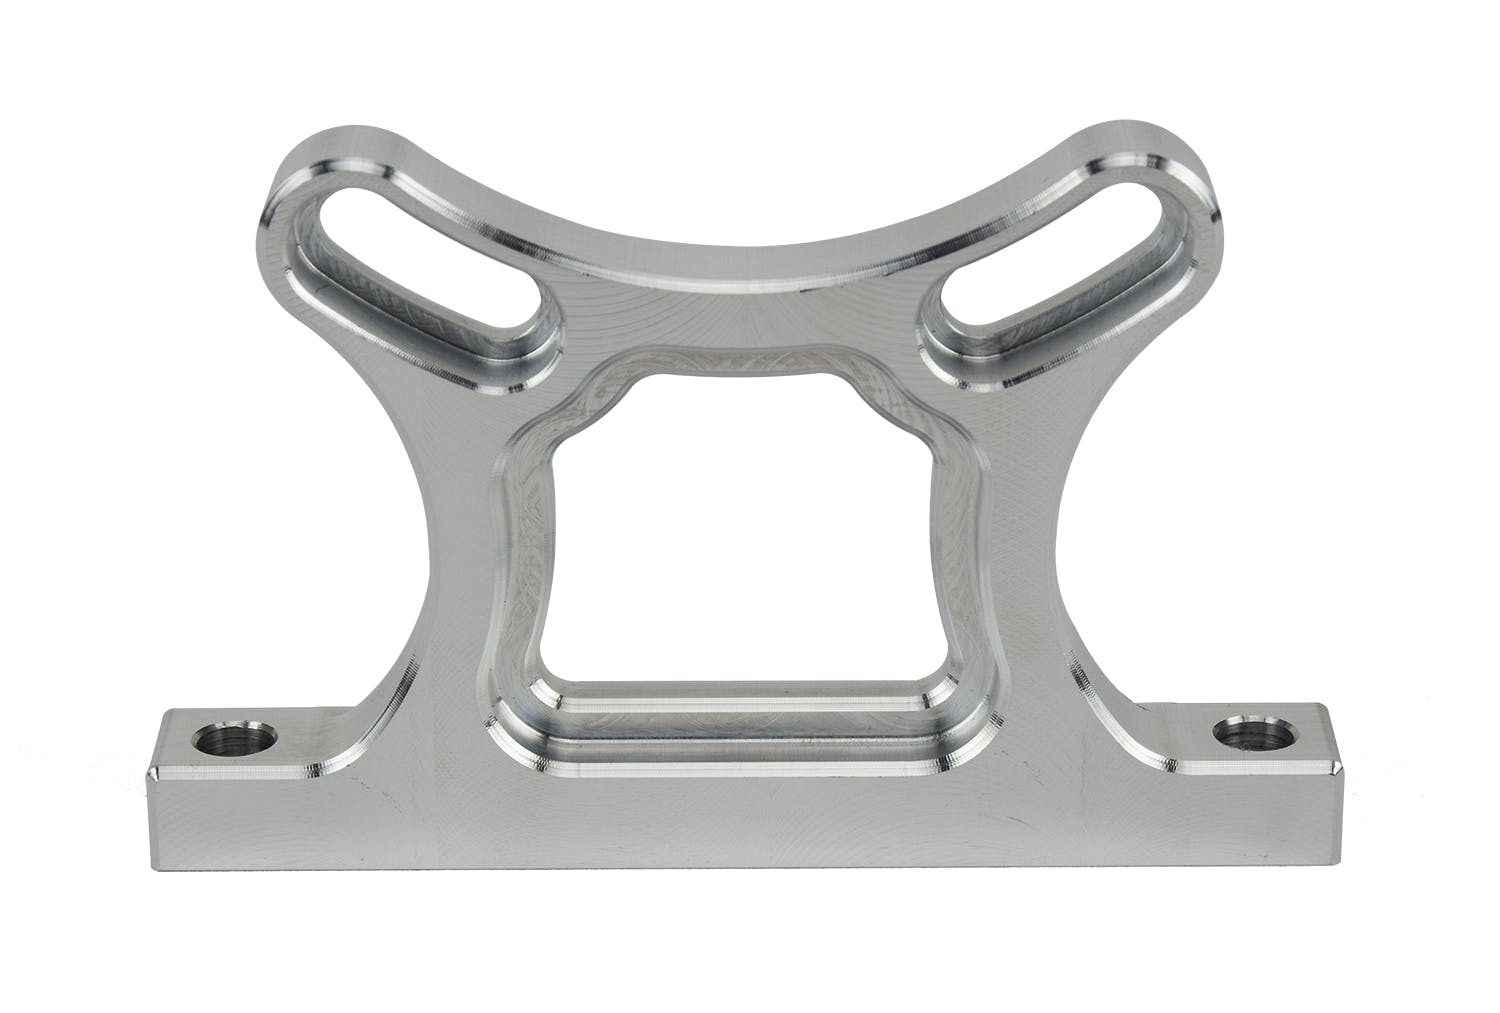 Air Lift Performance 01510 Mounting Bracket for FLO Tanks (Single bracket, no hardware included)